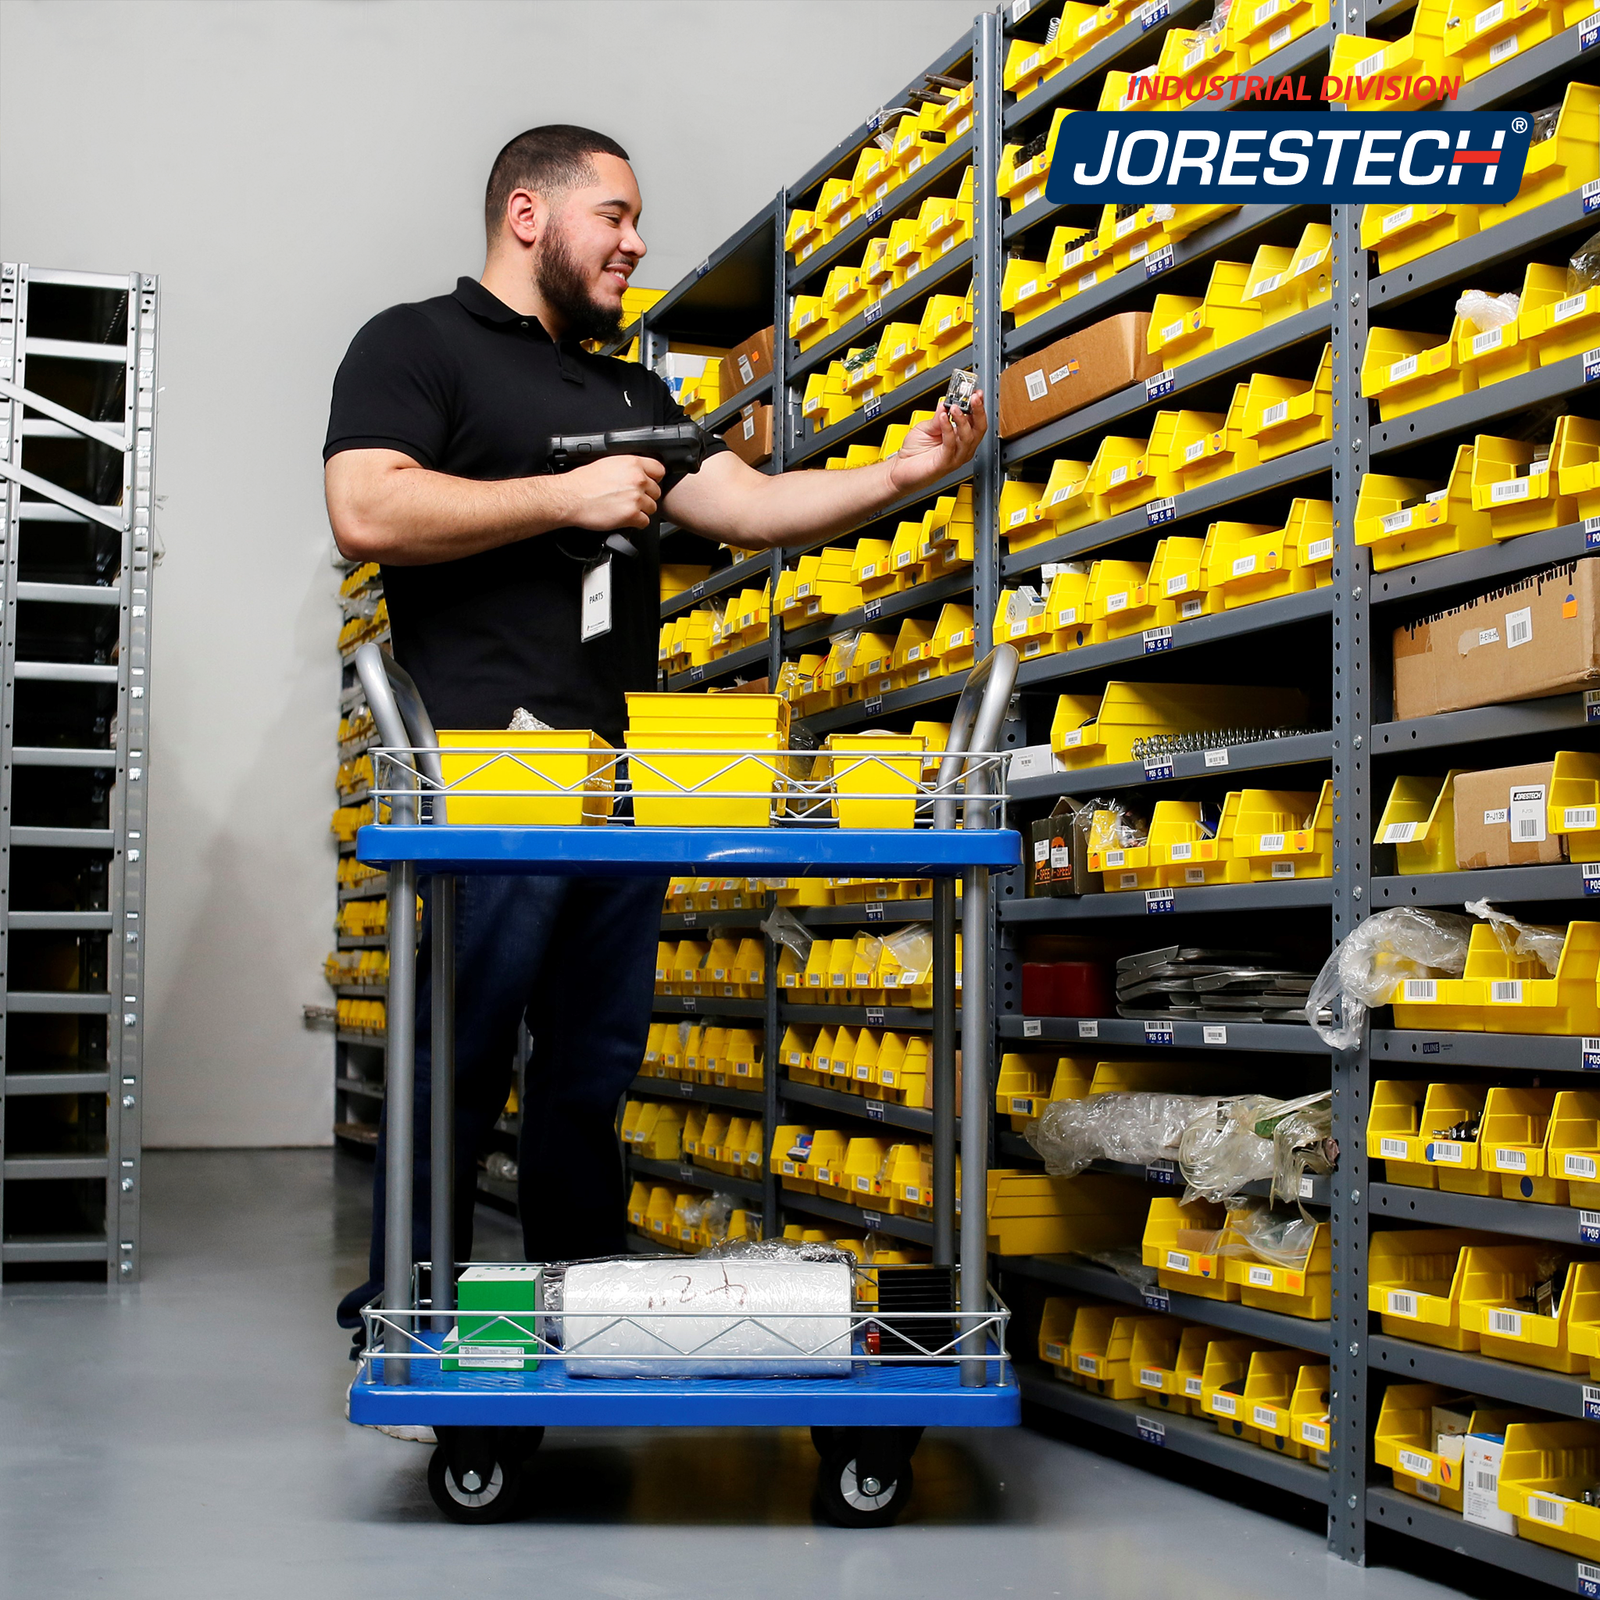 A man in a warehouse scanning some items and placing them on top of the dolly cart. He is using the JORES TECHNOLOGIES®  double platform utility push cart to roll the items around the workplace to reorganize